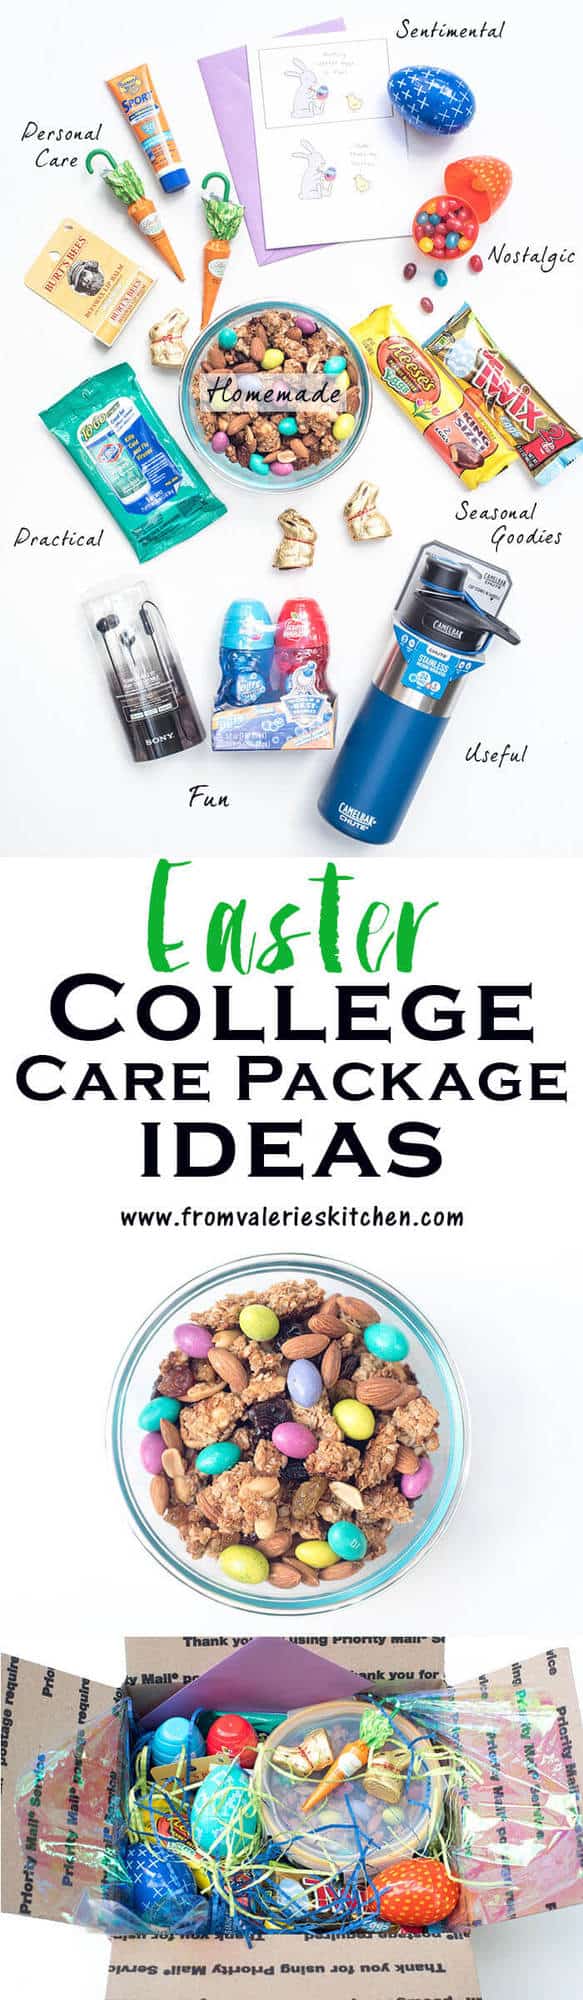 Easter care package items for a college student on a white board with text overlay.